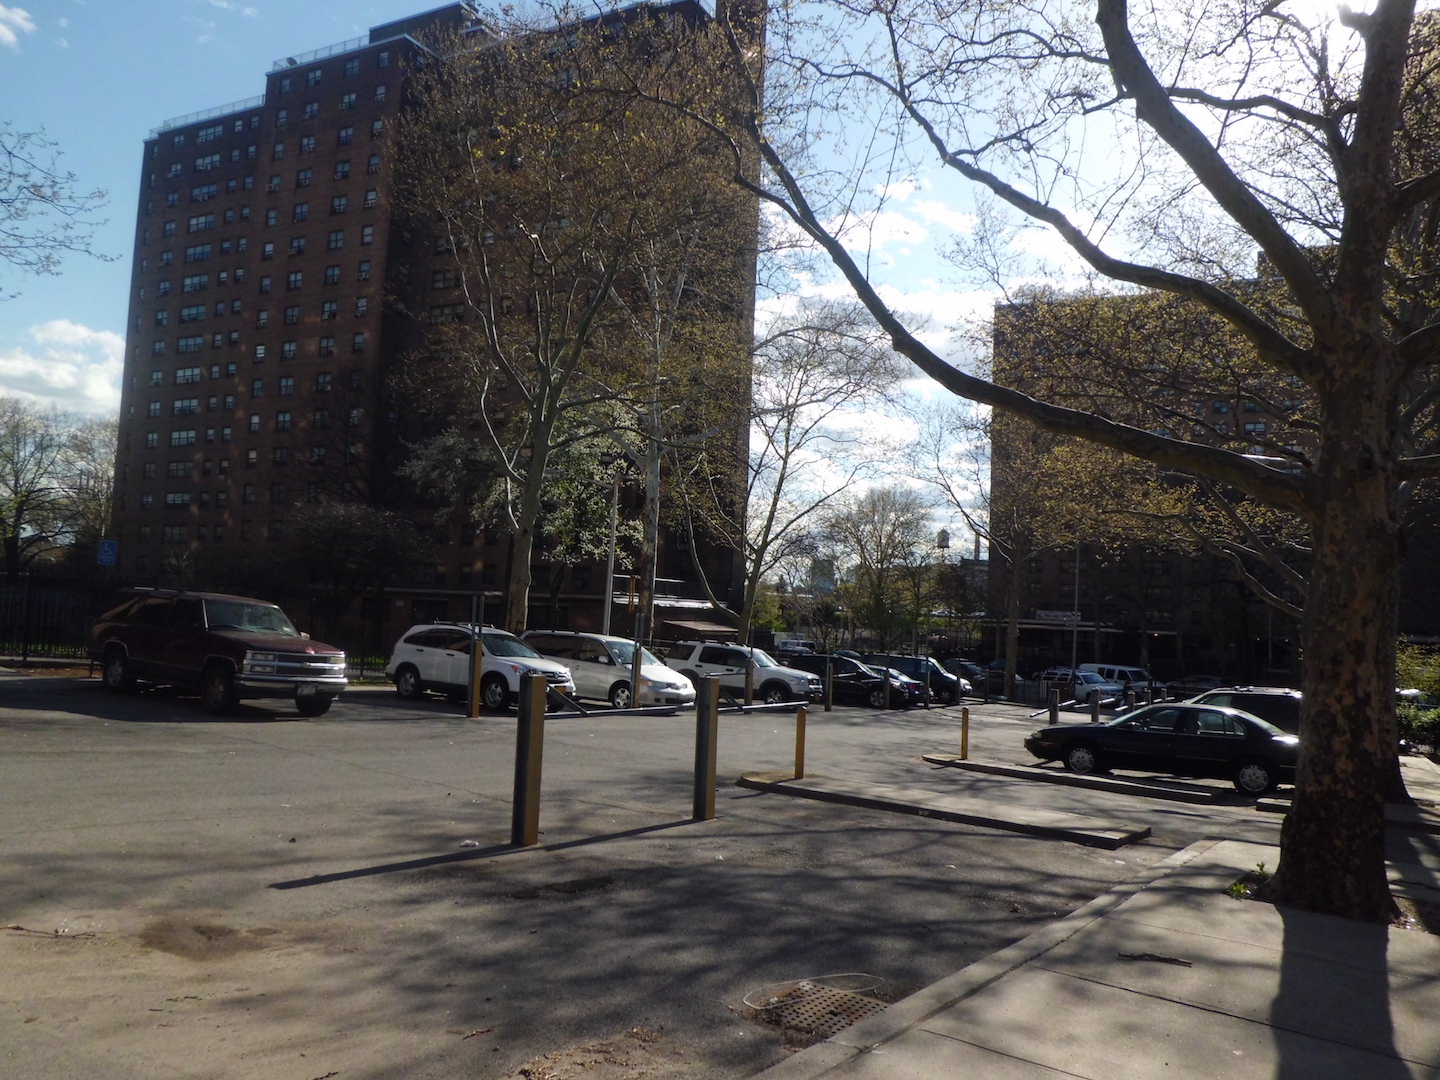 Op ed: The future of NYCHA is not the Blueprint for Change